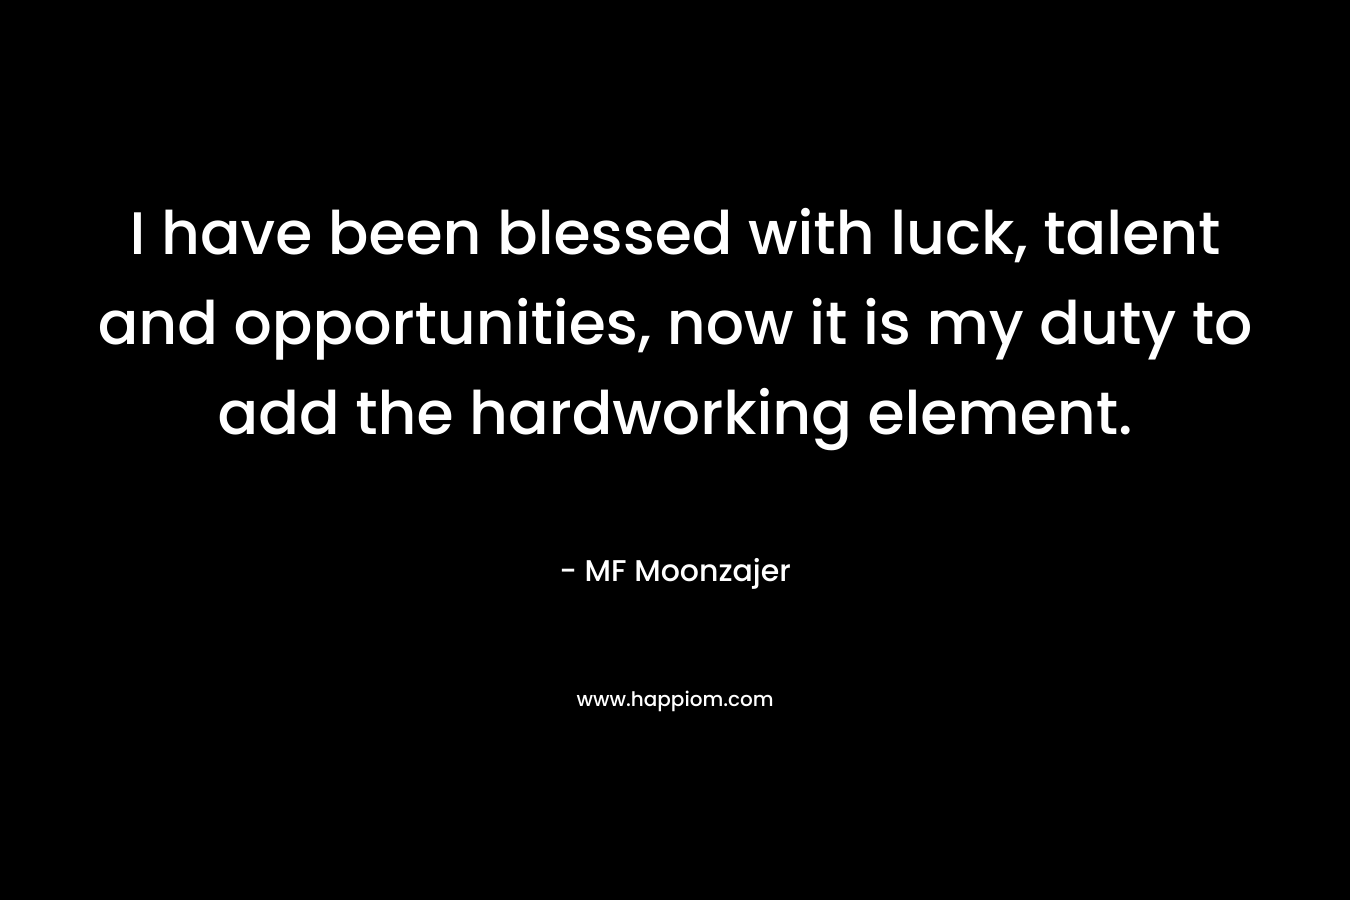 I have been blessed with luck, talent and opportunities, now it is my duty to add the hardworking element. – MF Moonzajer